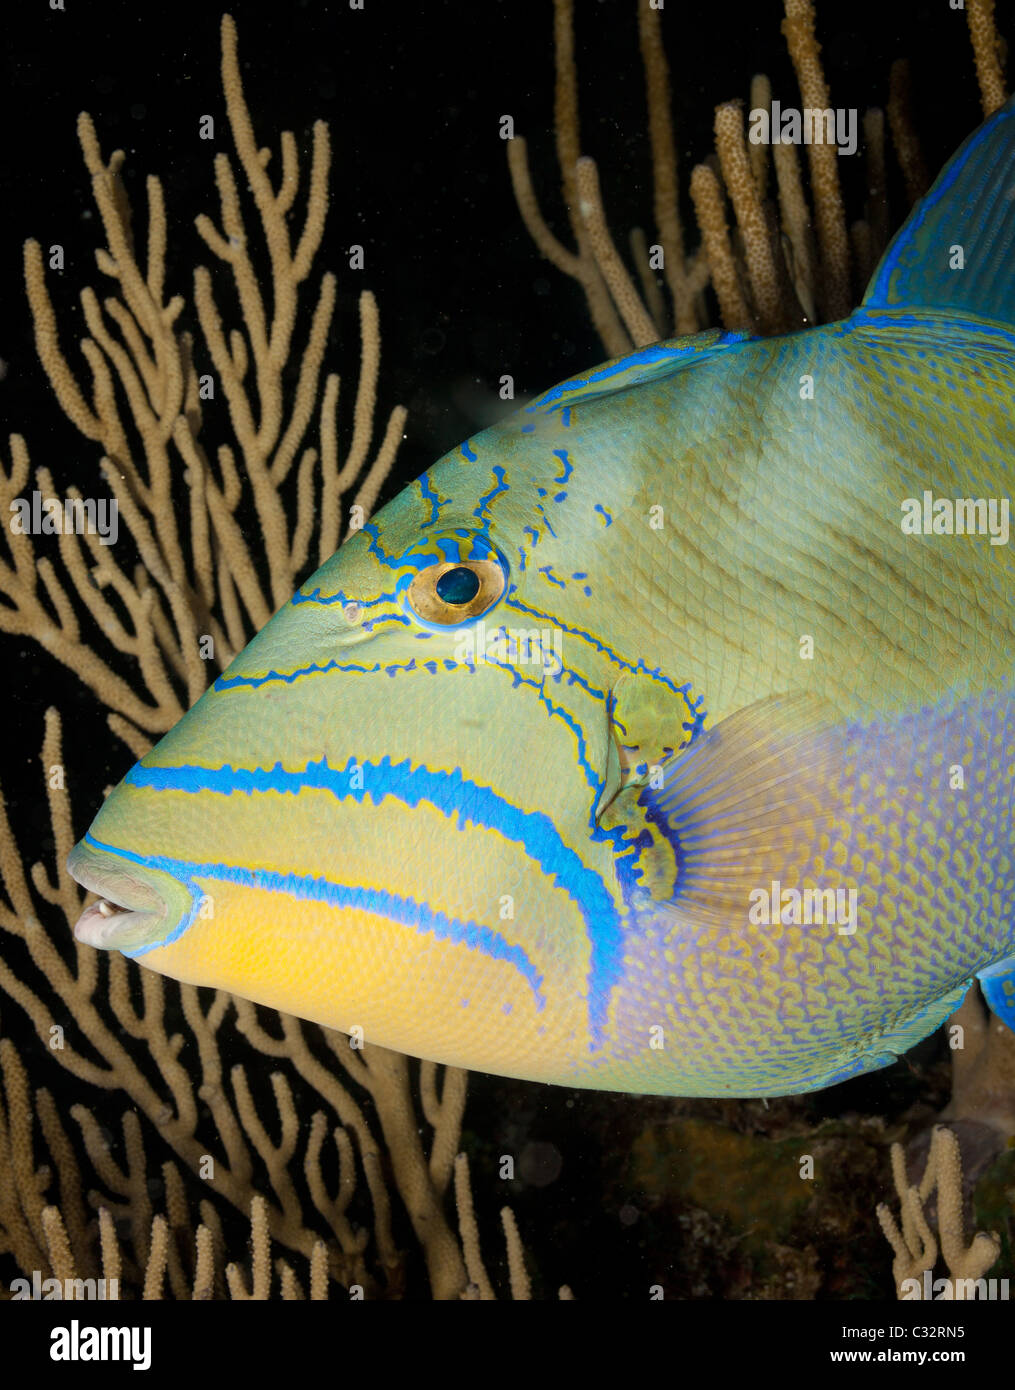 Colorful Queen Triggerfish Stock Photo